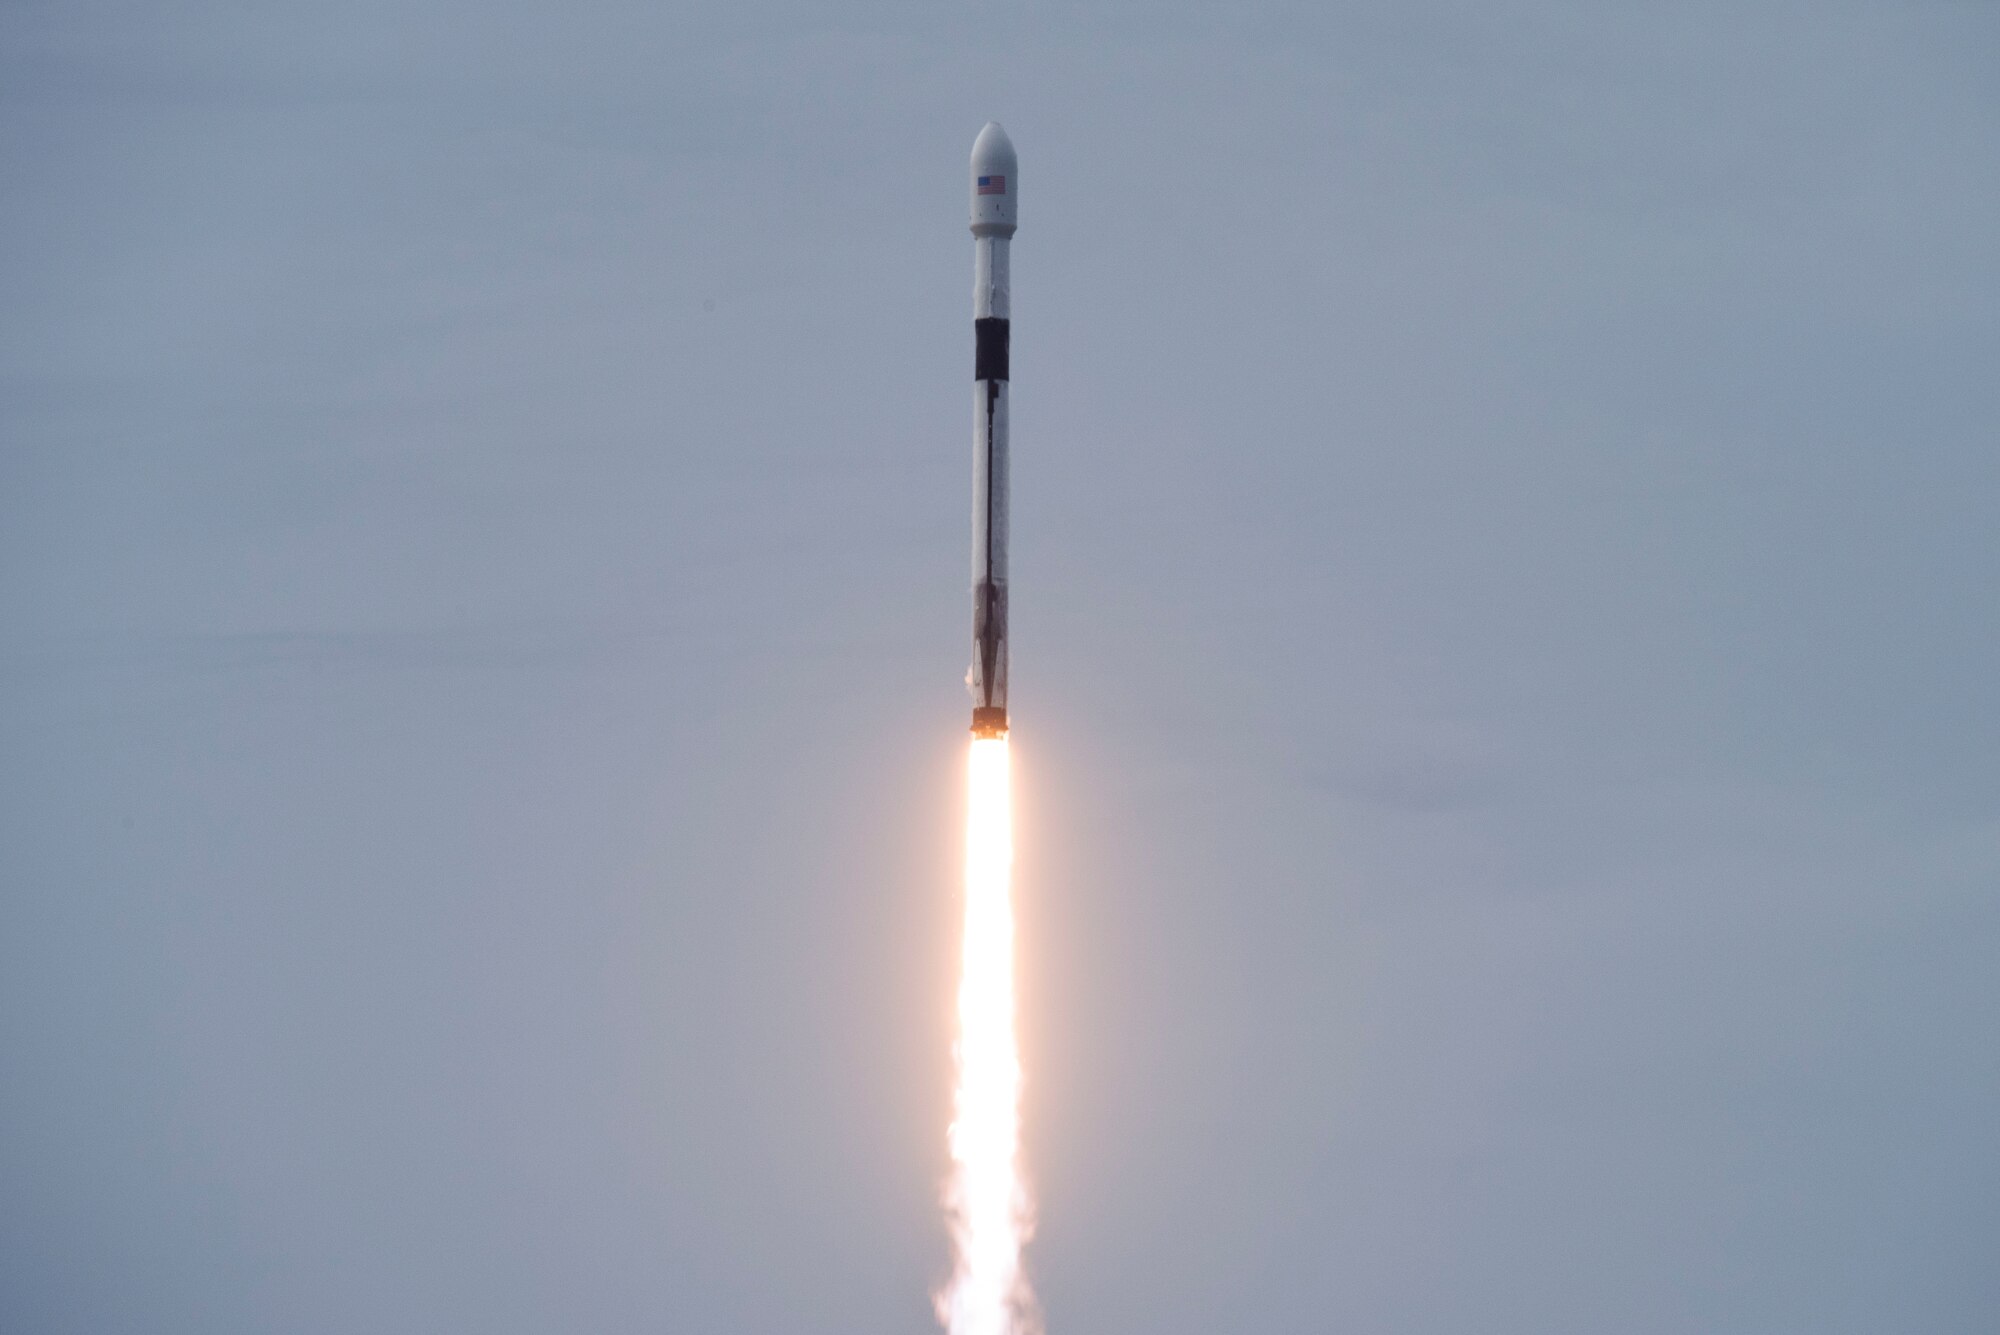 SpaceX's Falcon 9 AMOS-17 rocket launched on August 6, 2019, from Space Launch Complex-40 at Cape Canaveral Air Force Station, Fla. The AMOS-17 mission will be the most advanced satellite to provide satellite communication services to Africa. (U.S. Air Force photo by Airman 1st Class Zoe Thacker)